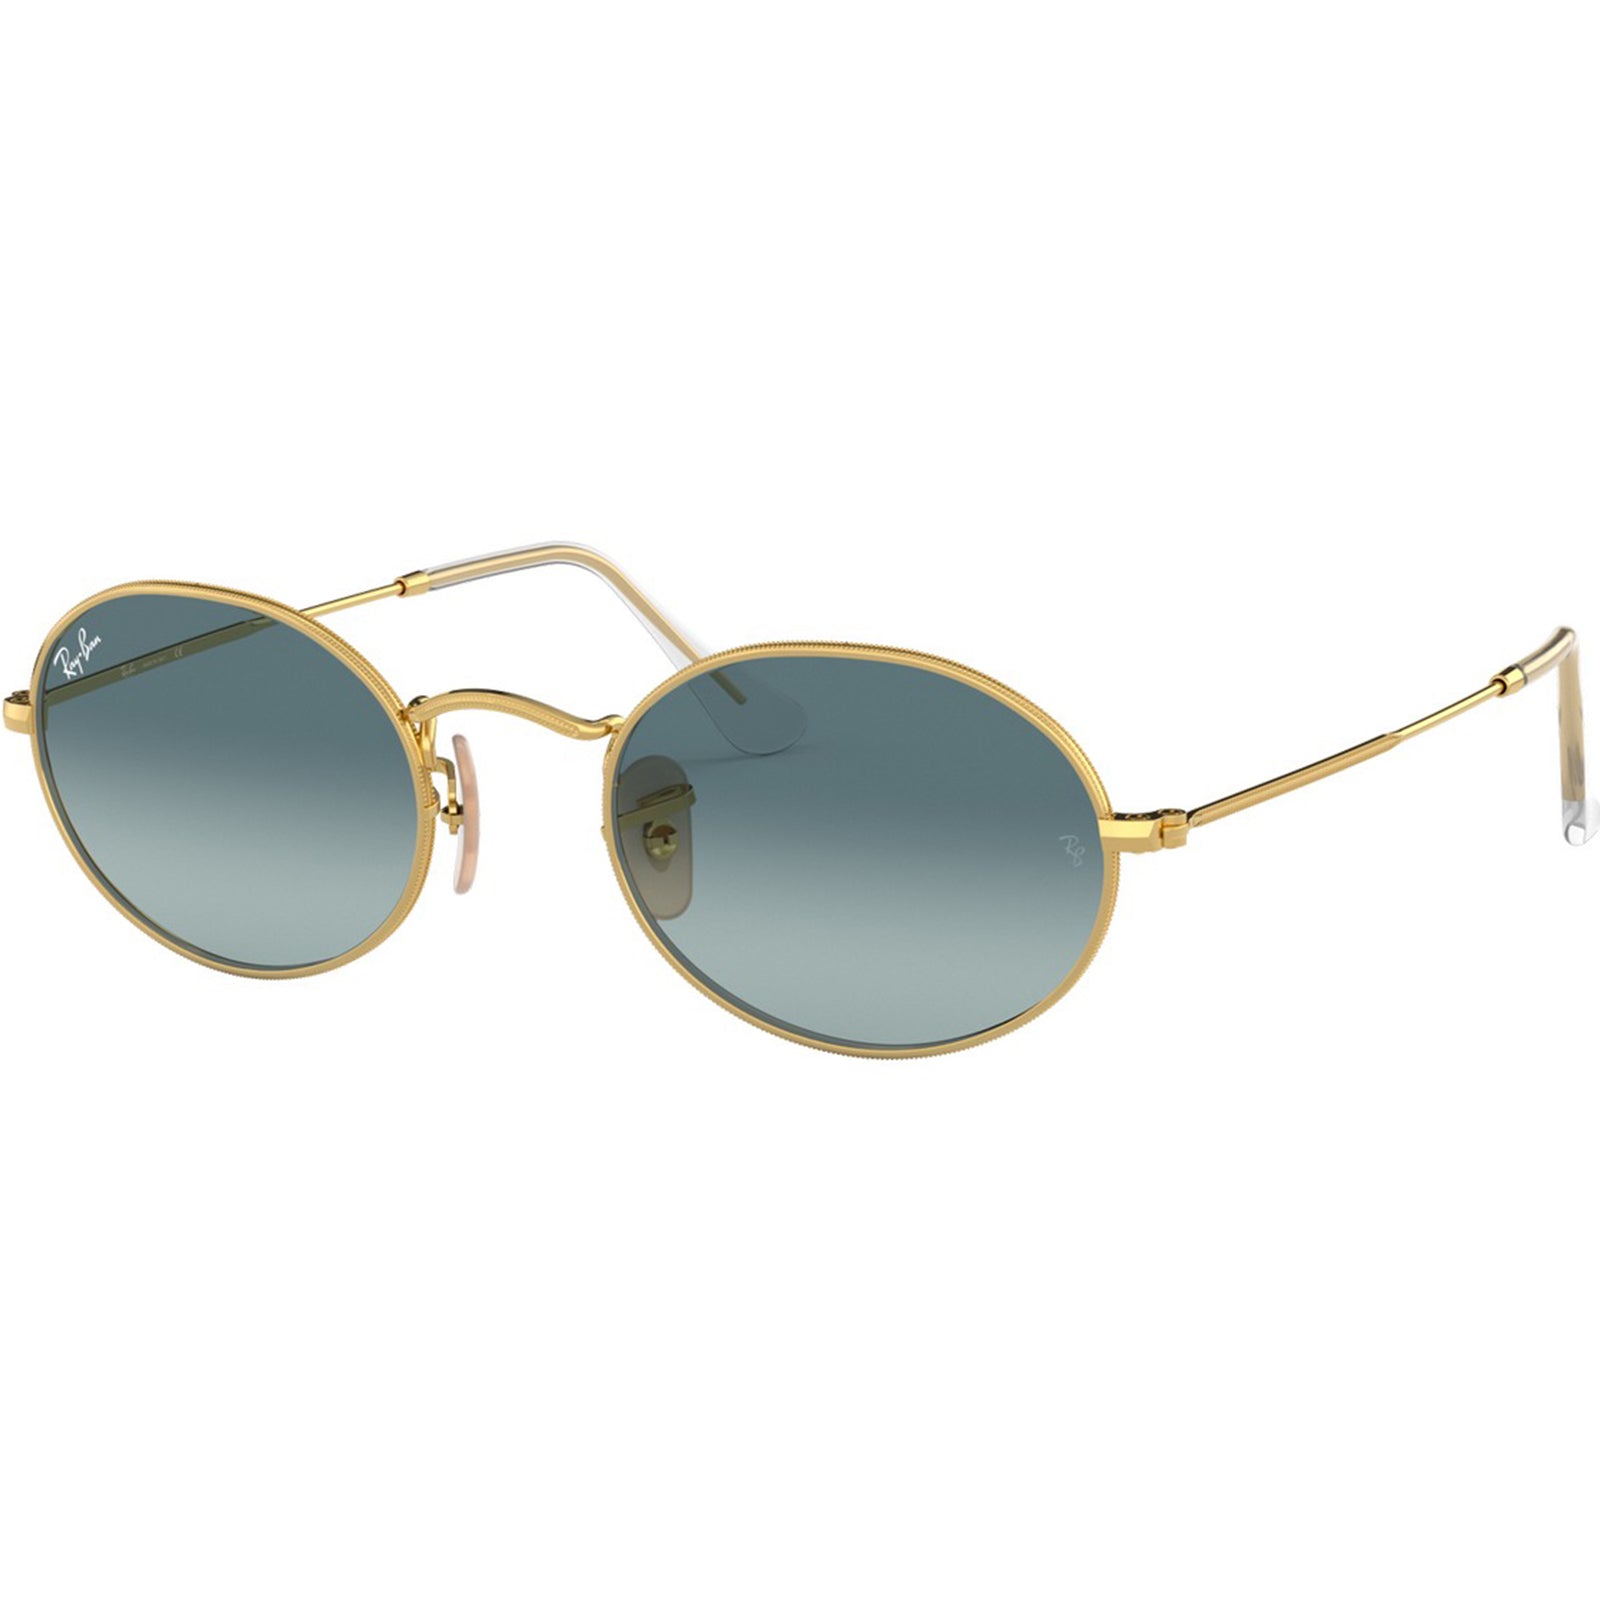 Ray-Ban RB3547 Oval Men's Lifestyle Sunglasses-0RB3547